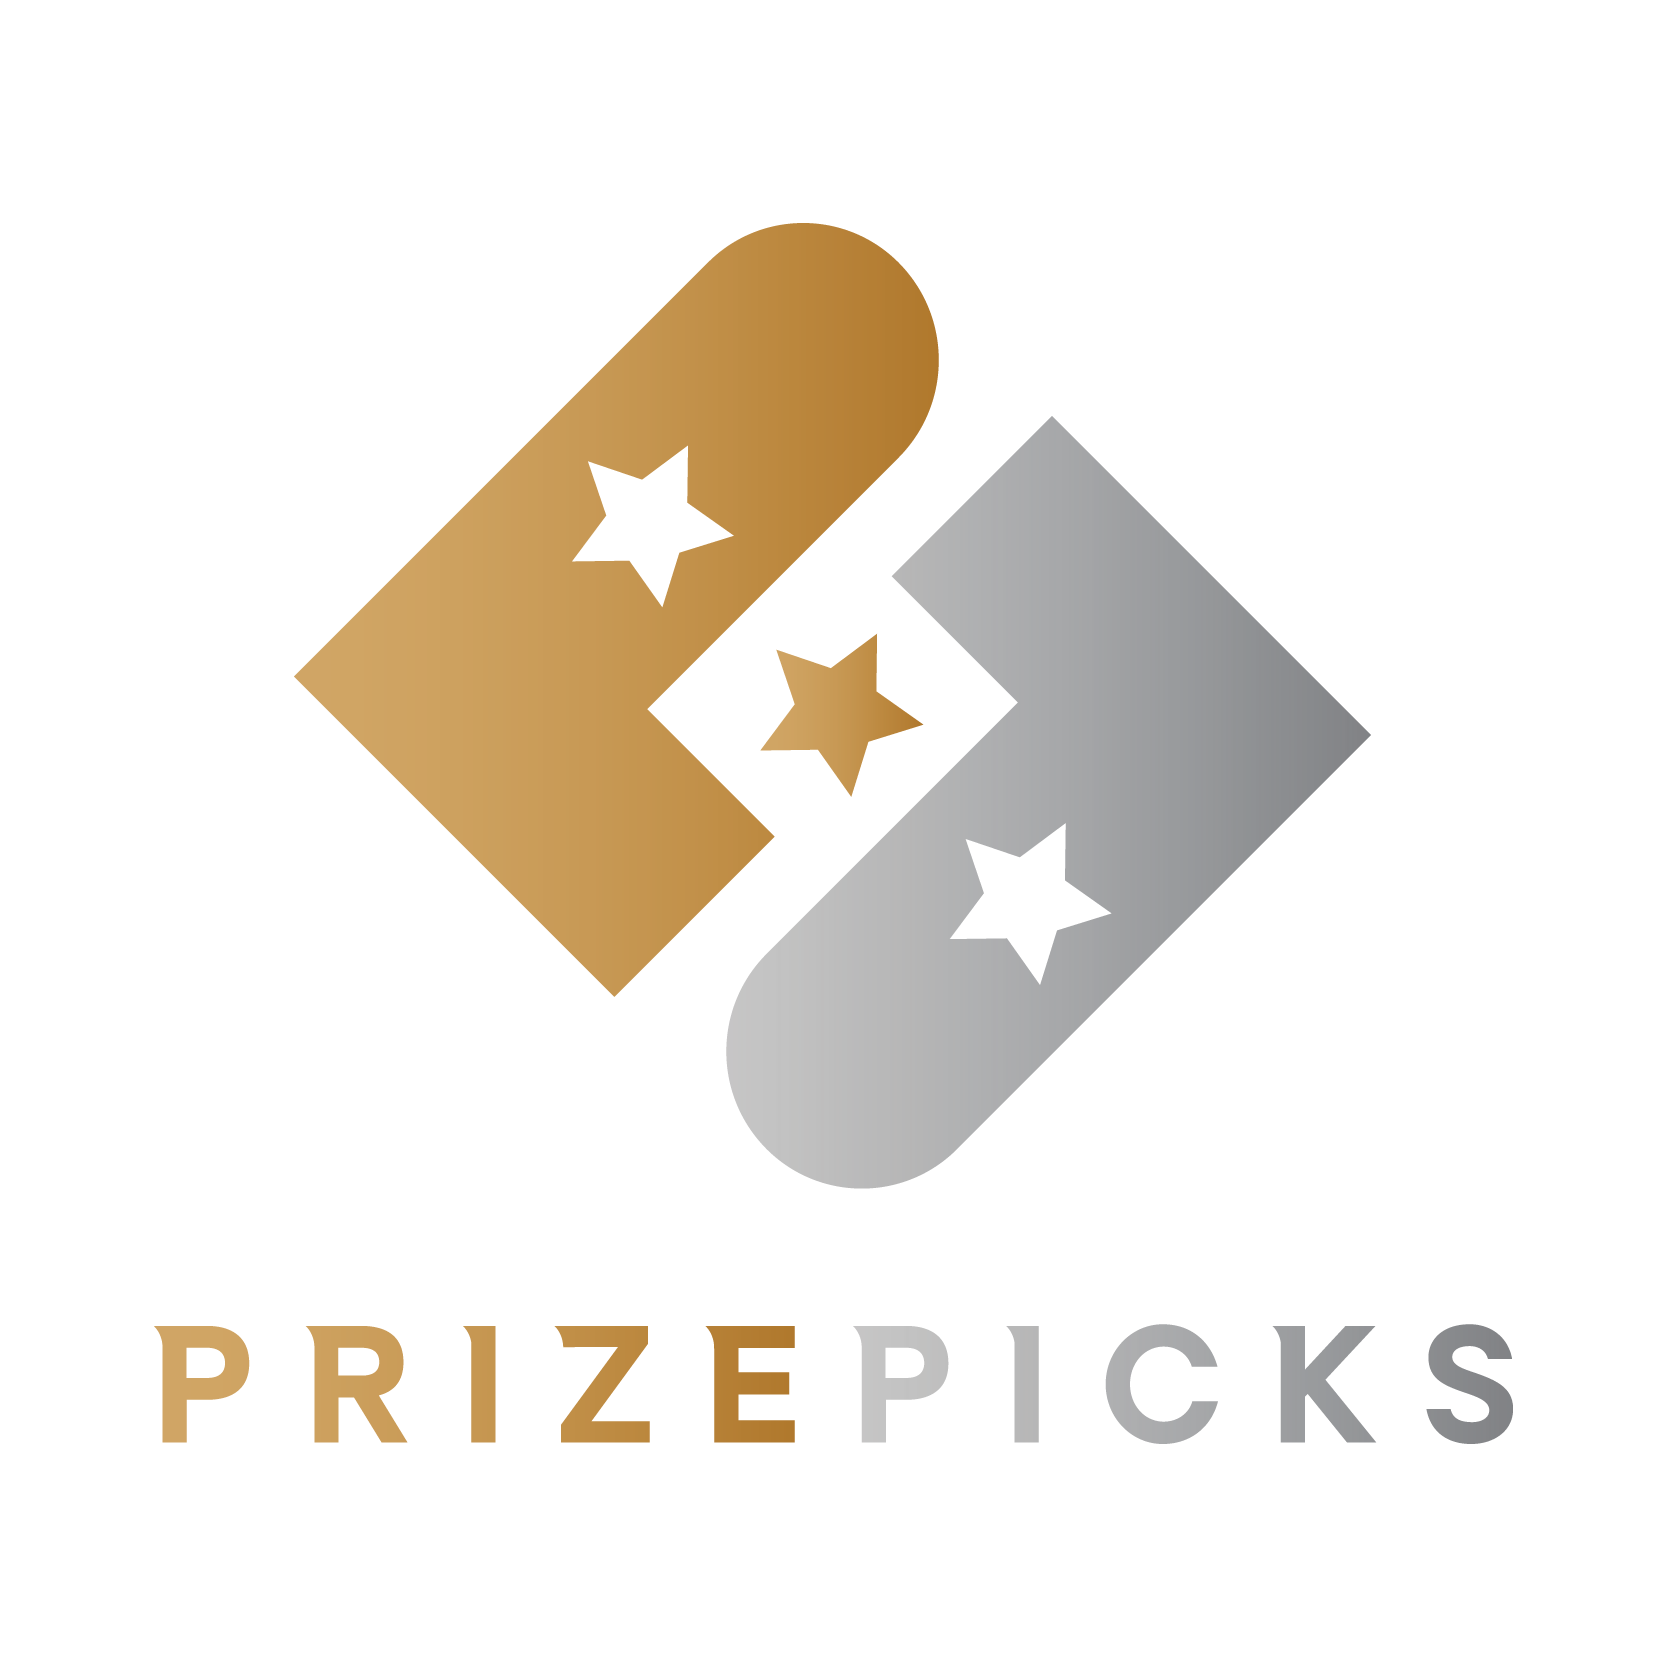 Introducing PrizePicks, The Most Simple, Fast And Fun Daily Fantasy